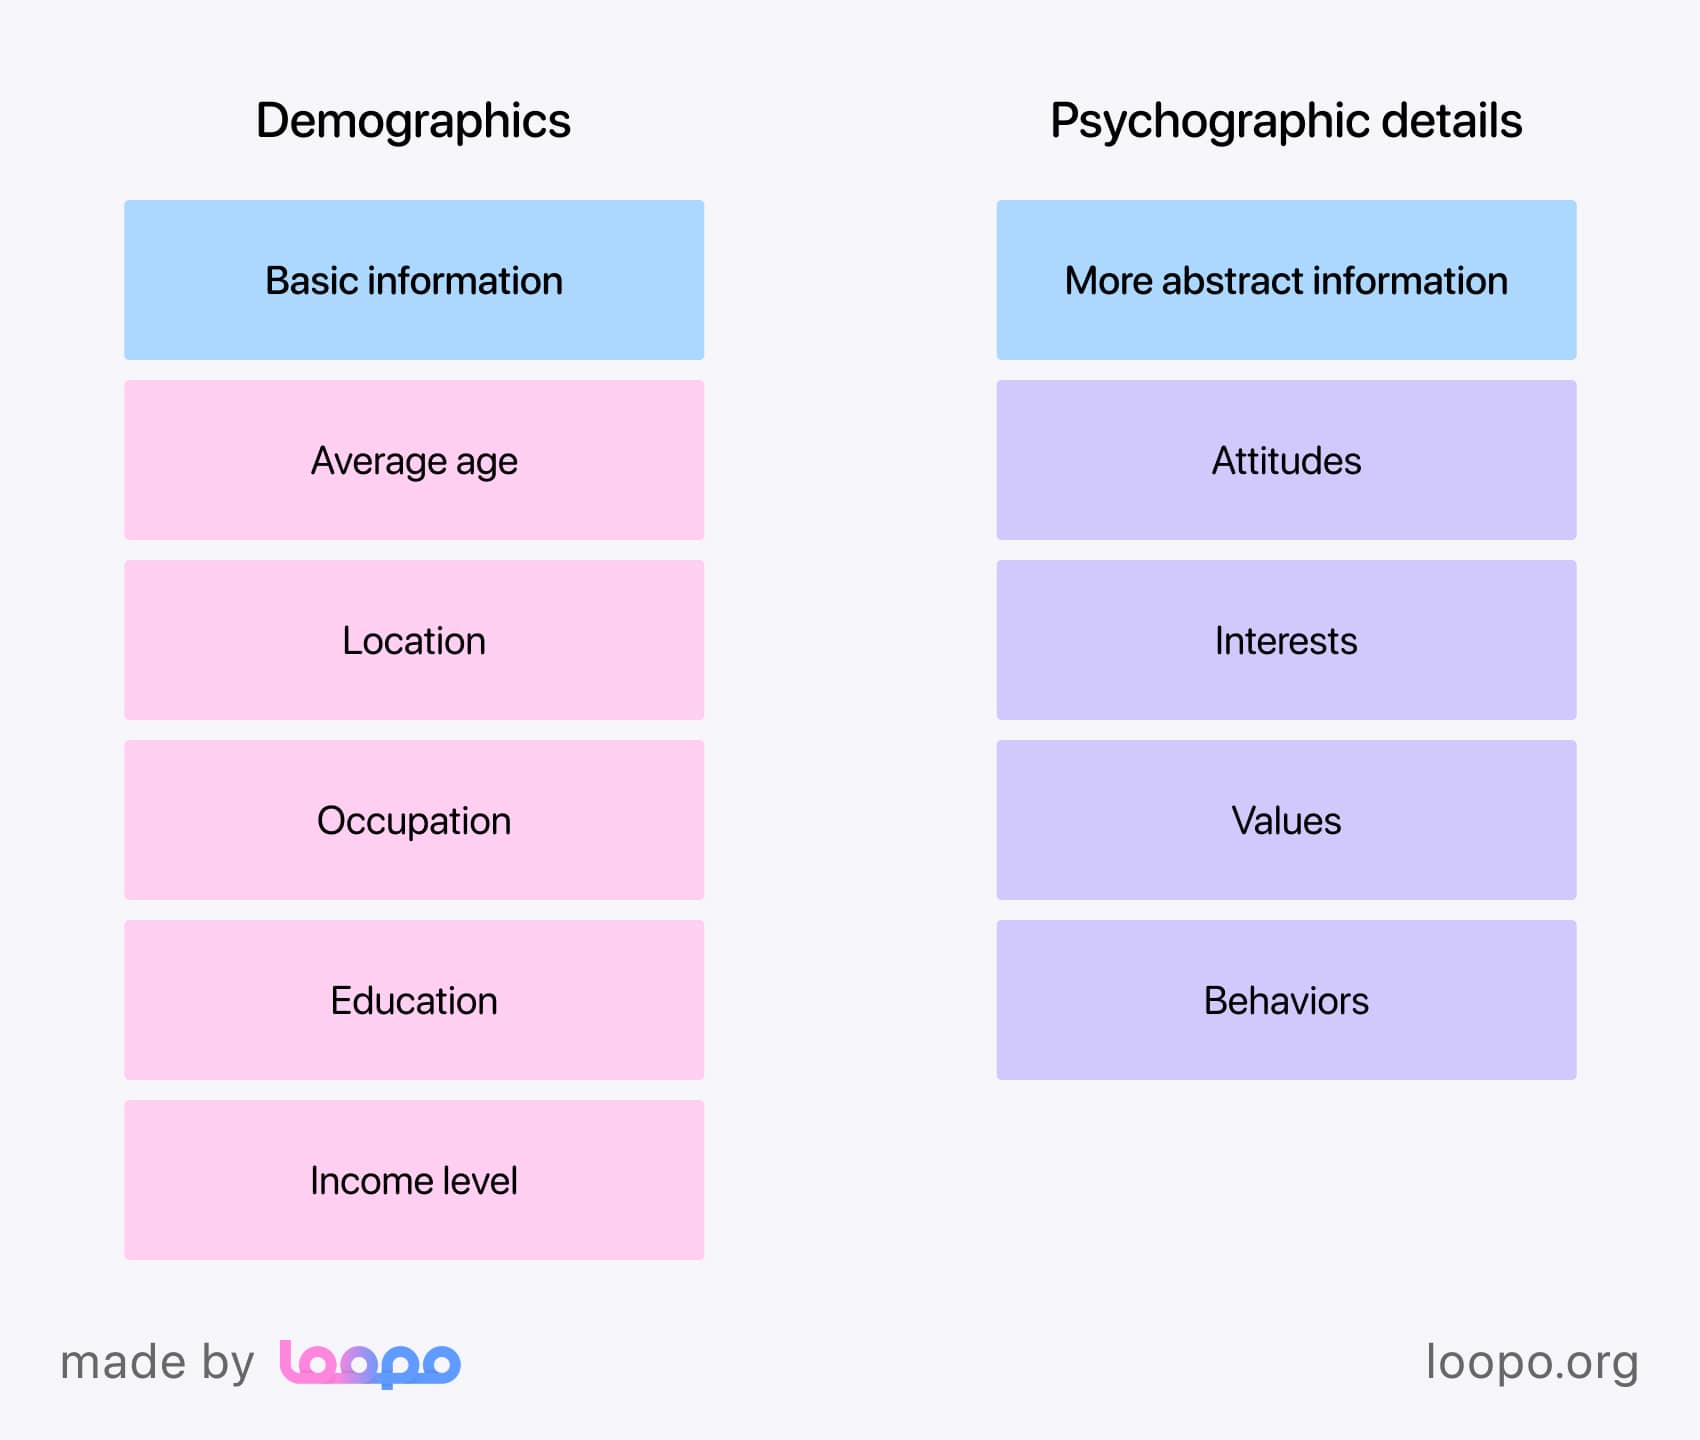 Demographics and psychographic details major differences